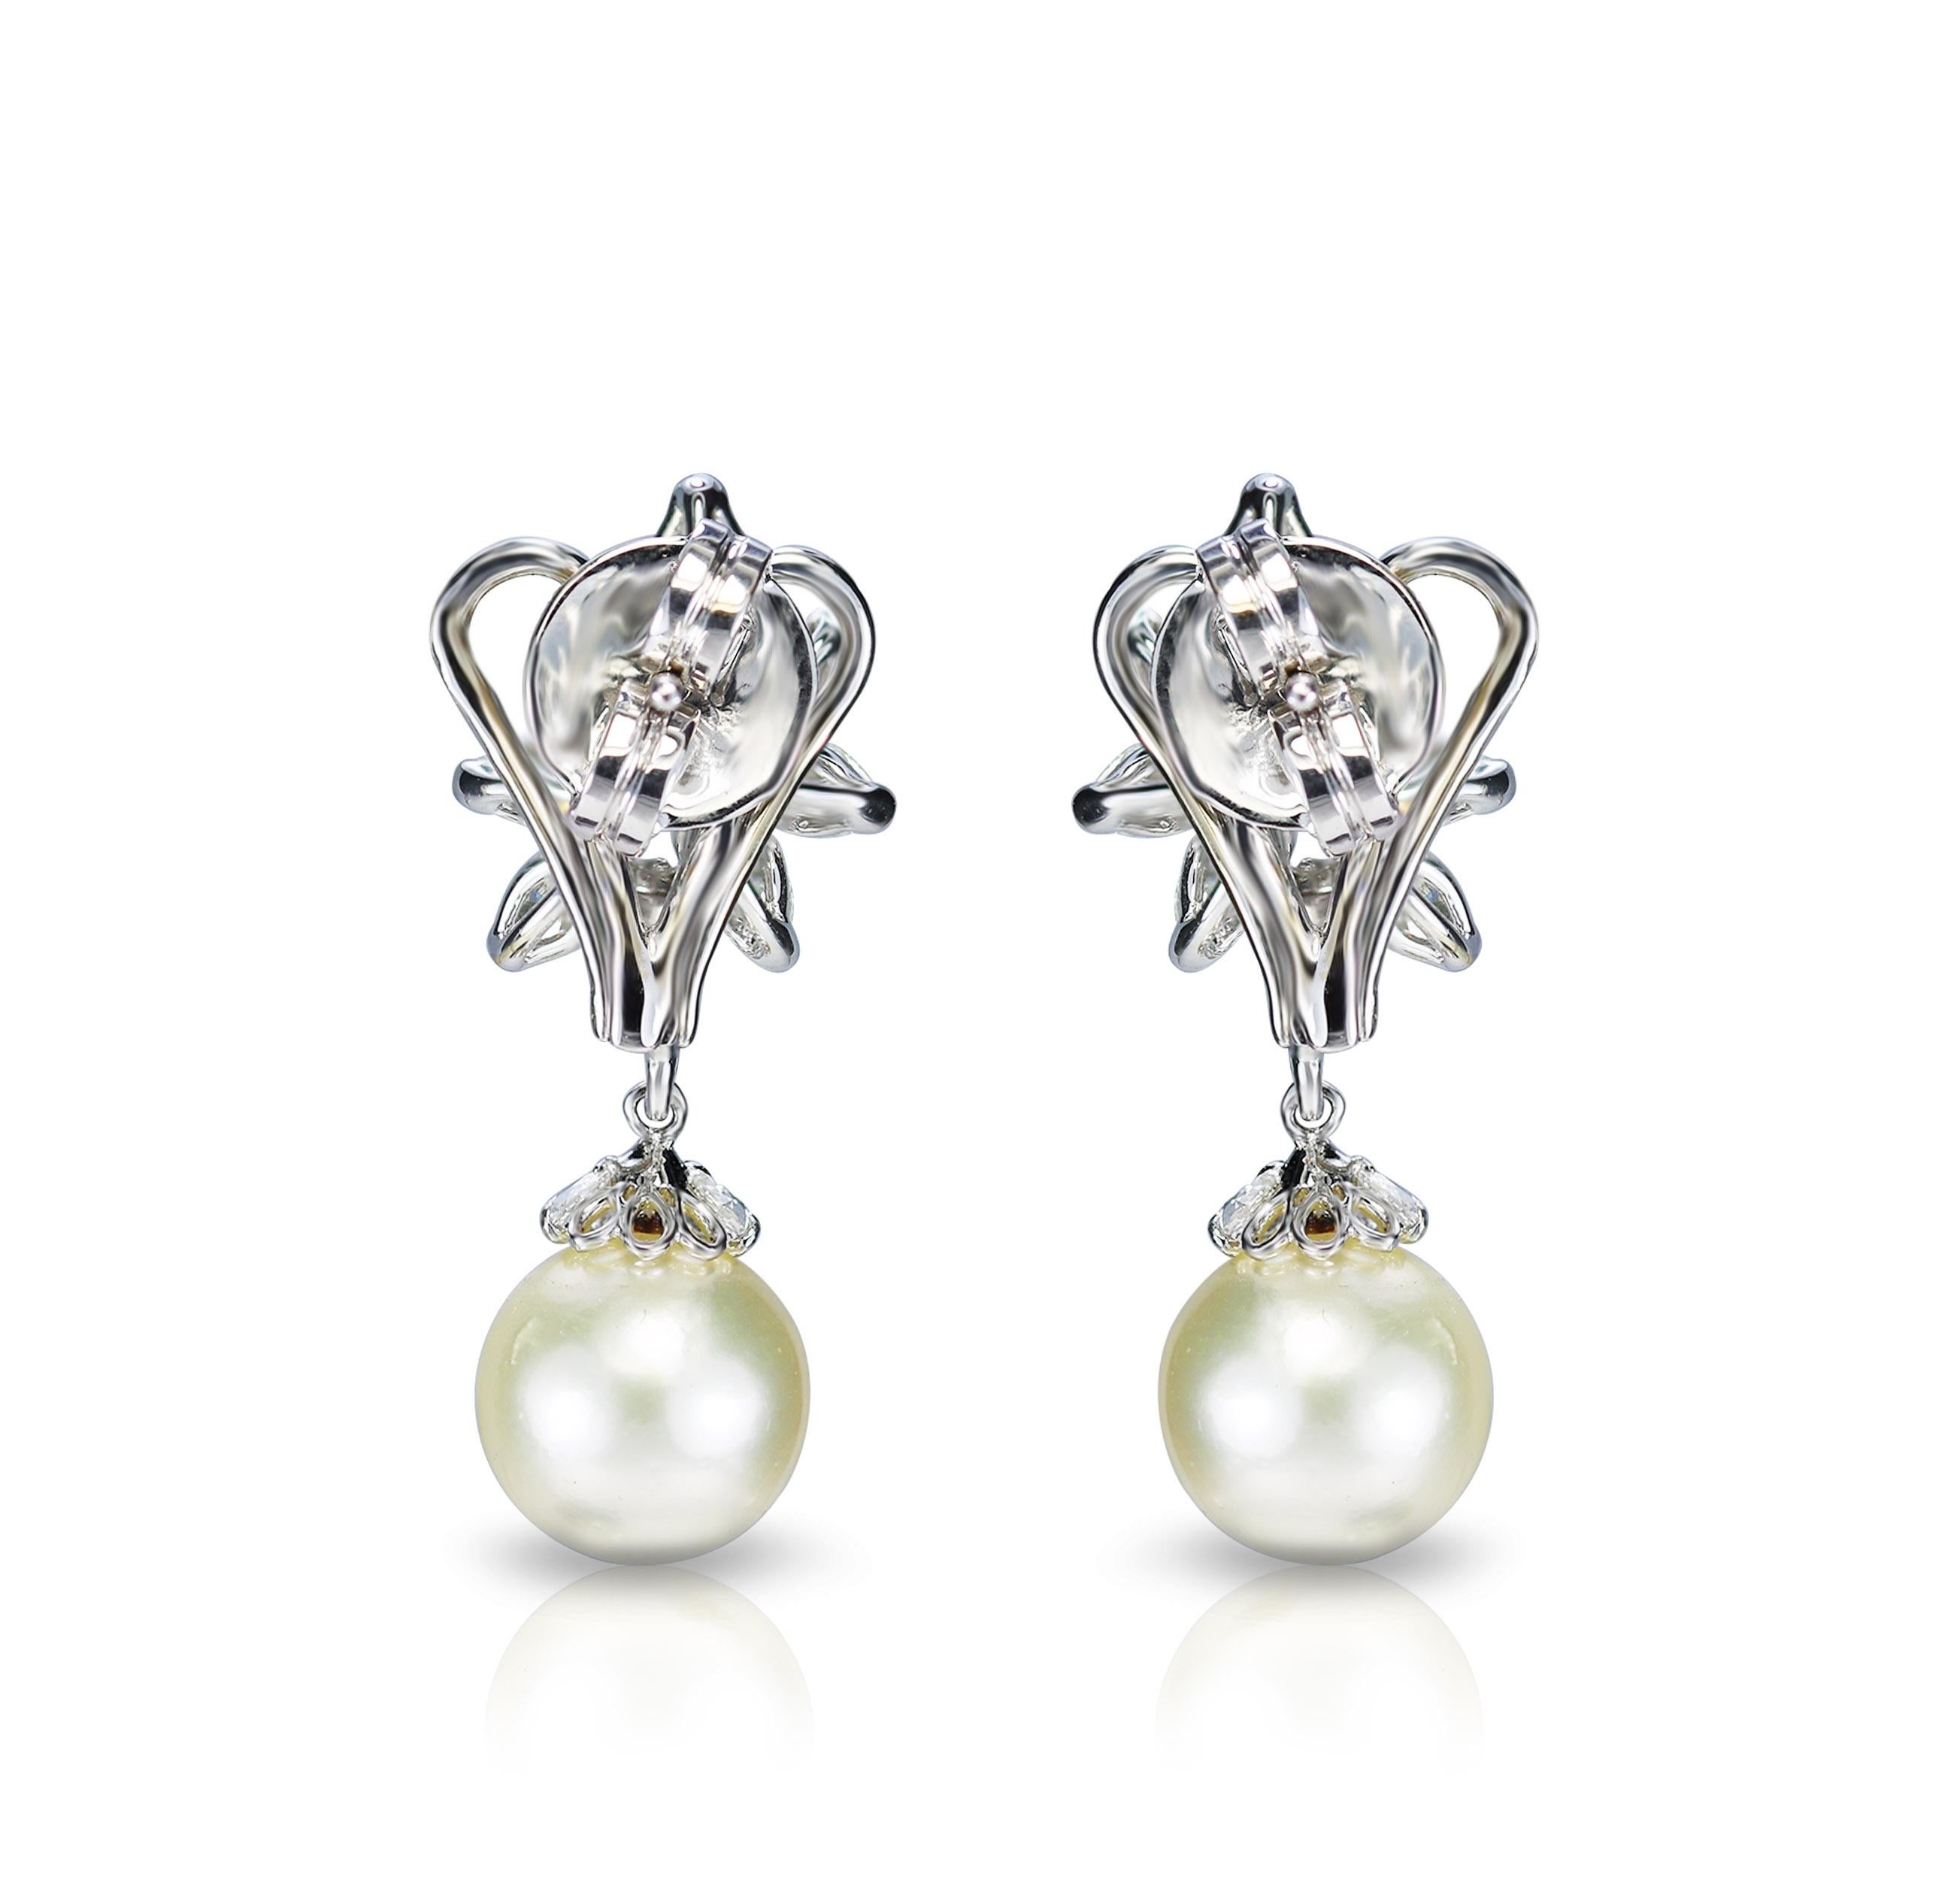 Marquise Cut Studio Rêves 18K Gold, Marquise Diamonds and South Sea Pearl Earrings